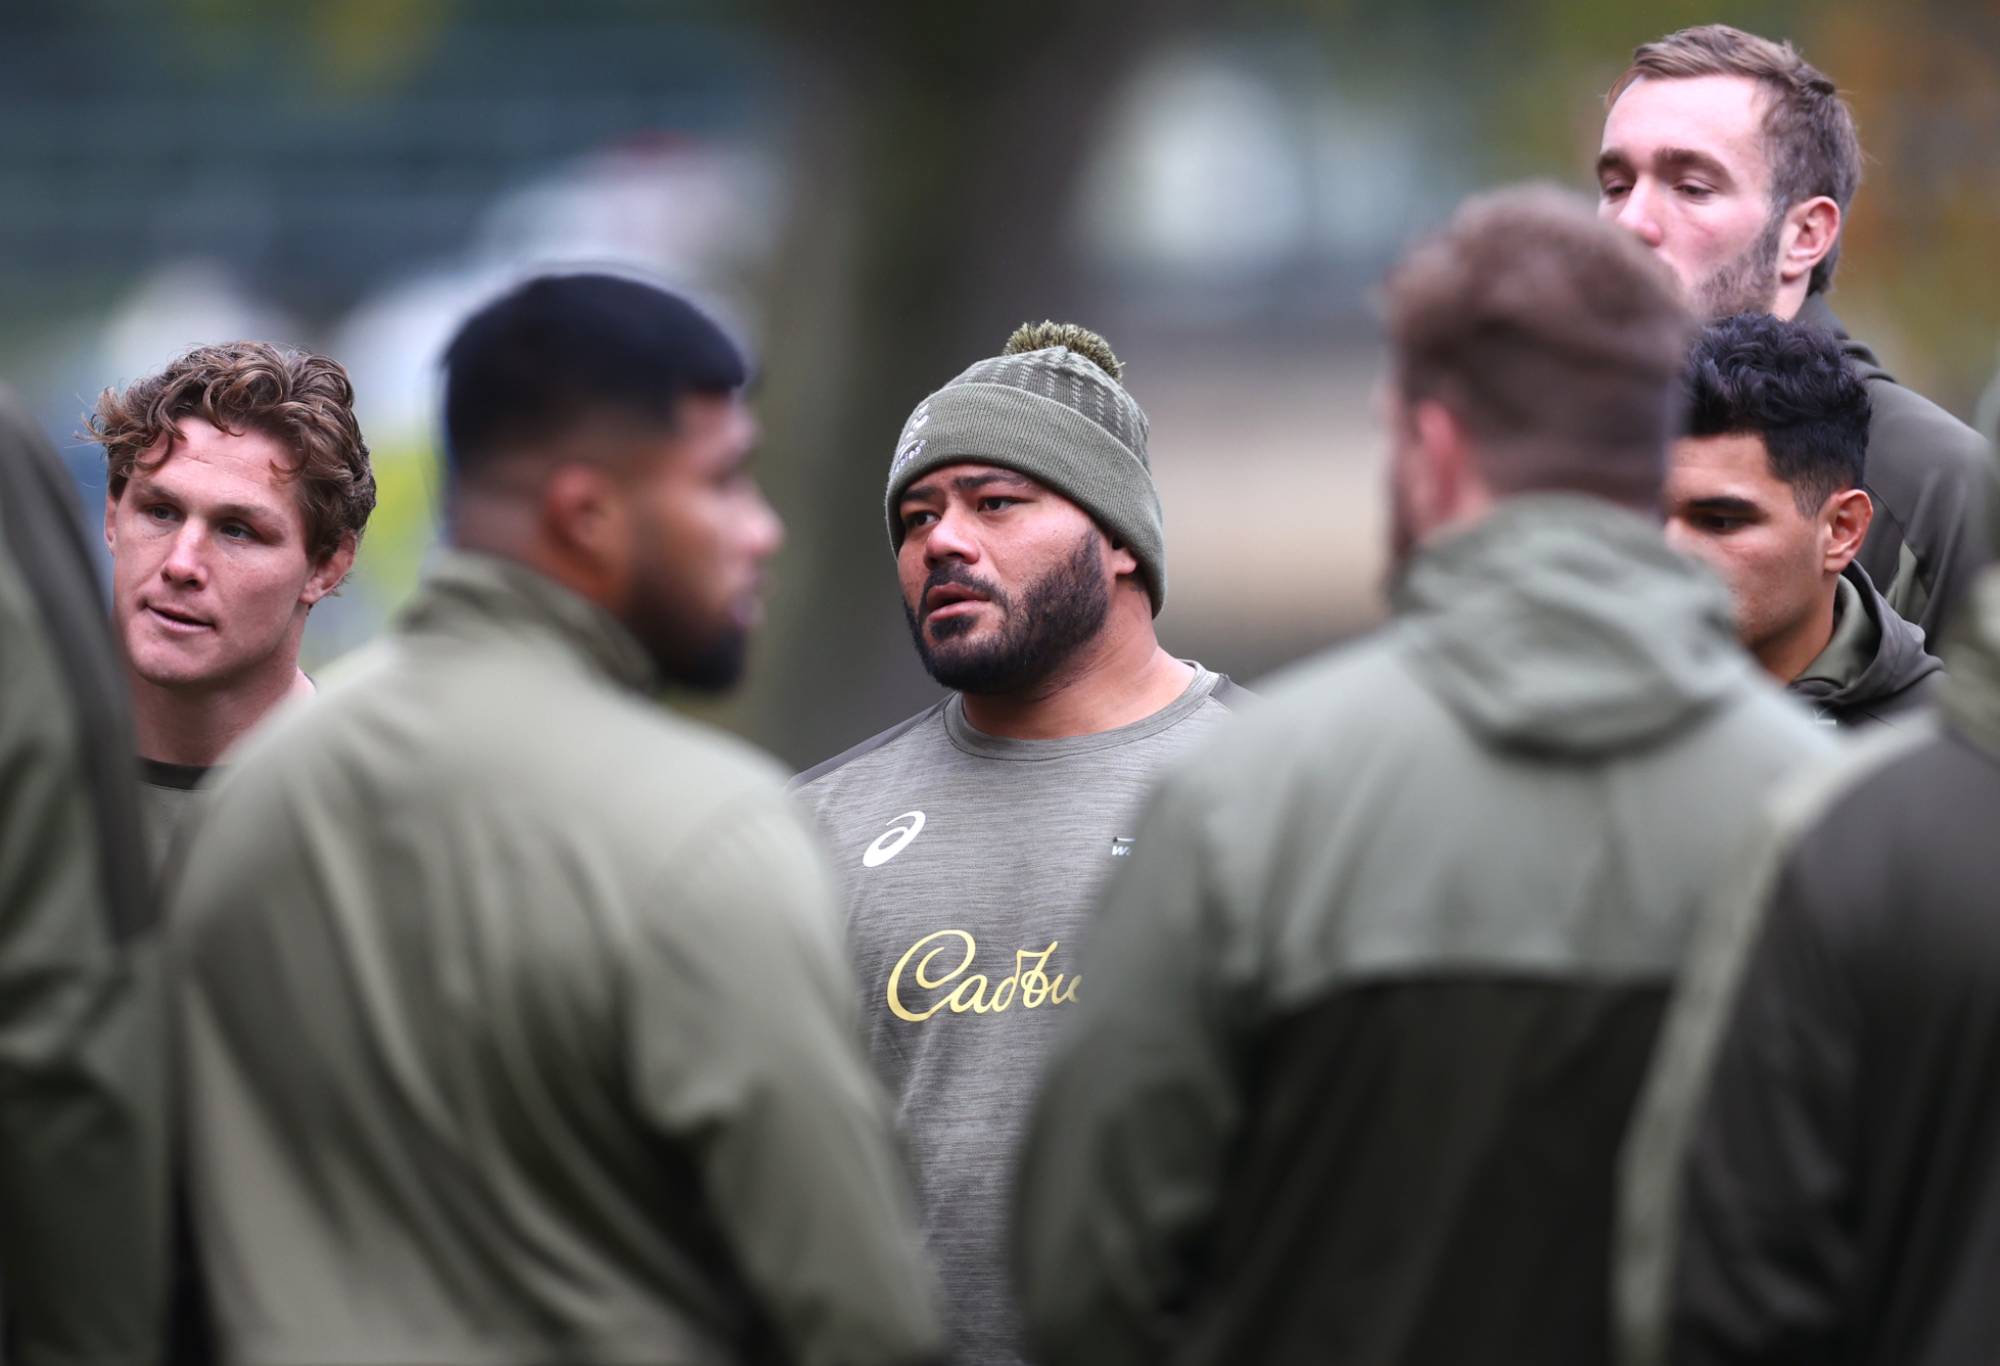 Tolu Latu of Australia looks on during an Australia Rugby Training Session session at The Lensbury hotel on November 12, 2021 in Teddington, England. (Photo by Clive Rose/Getty Images)